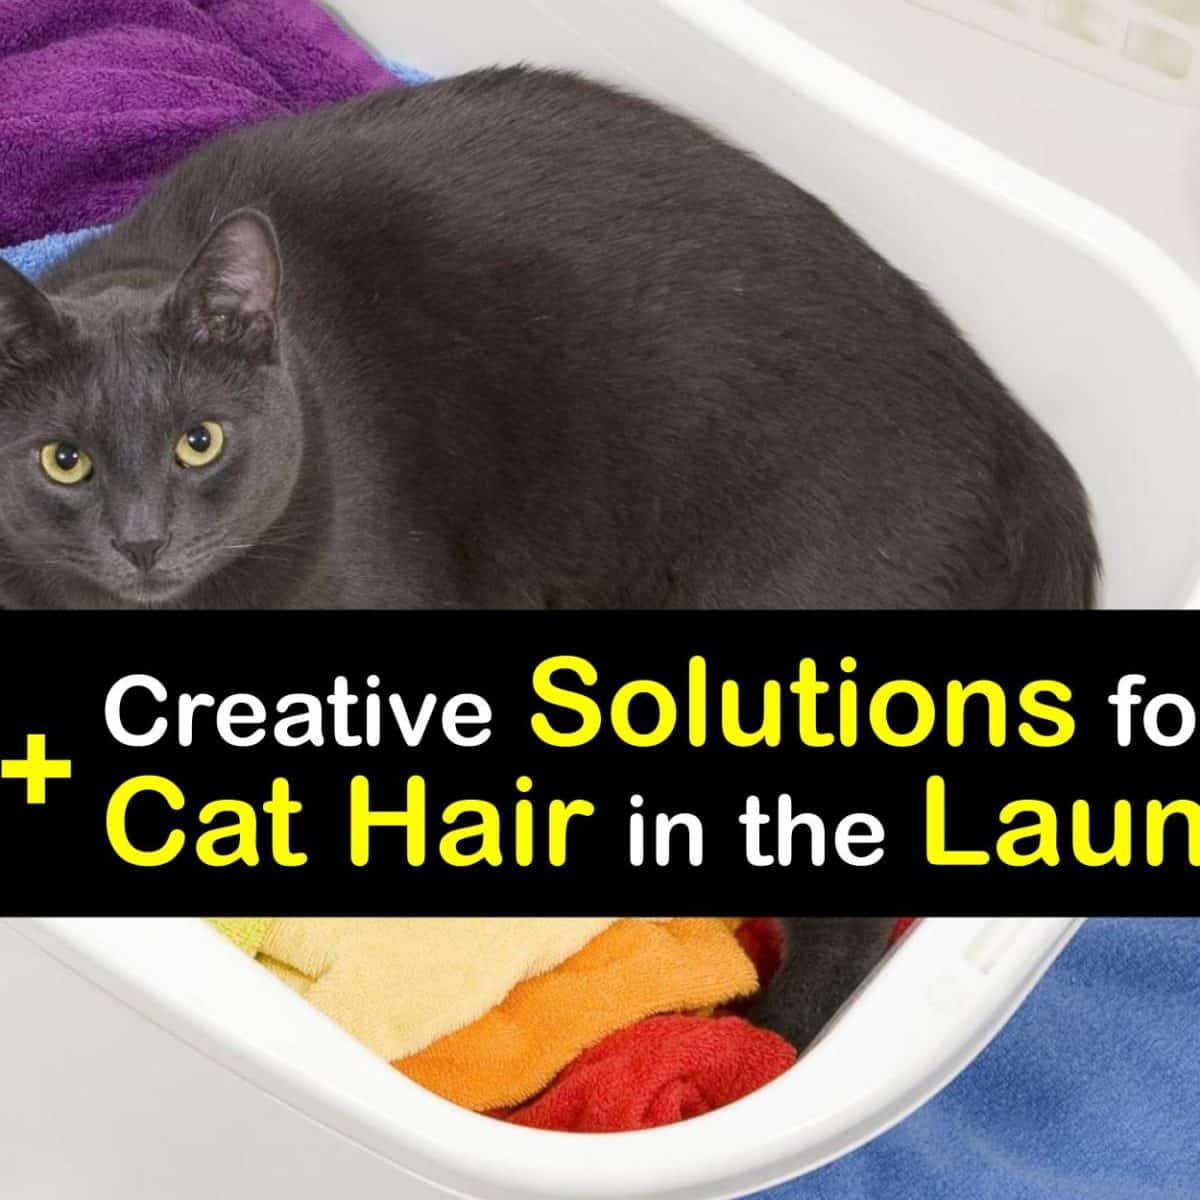 How to Get Cat Hair Out of the Laundry